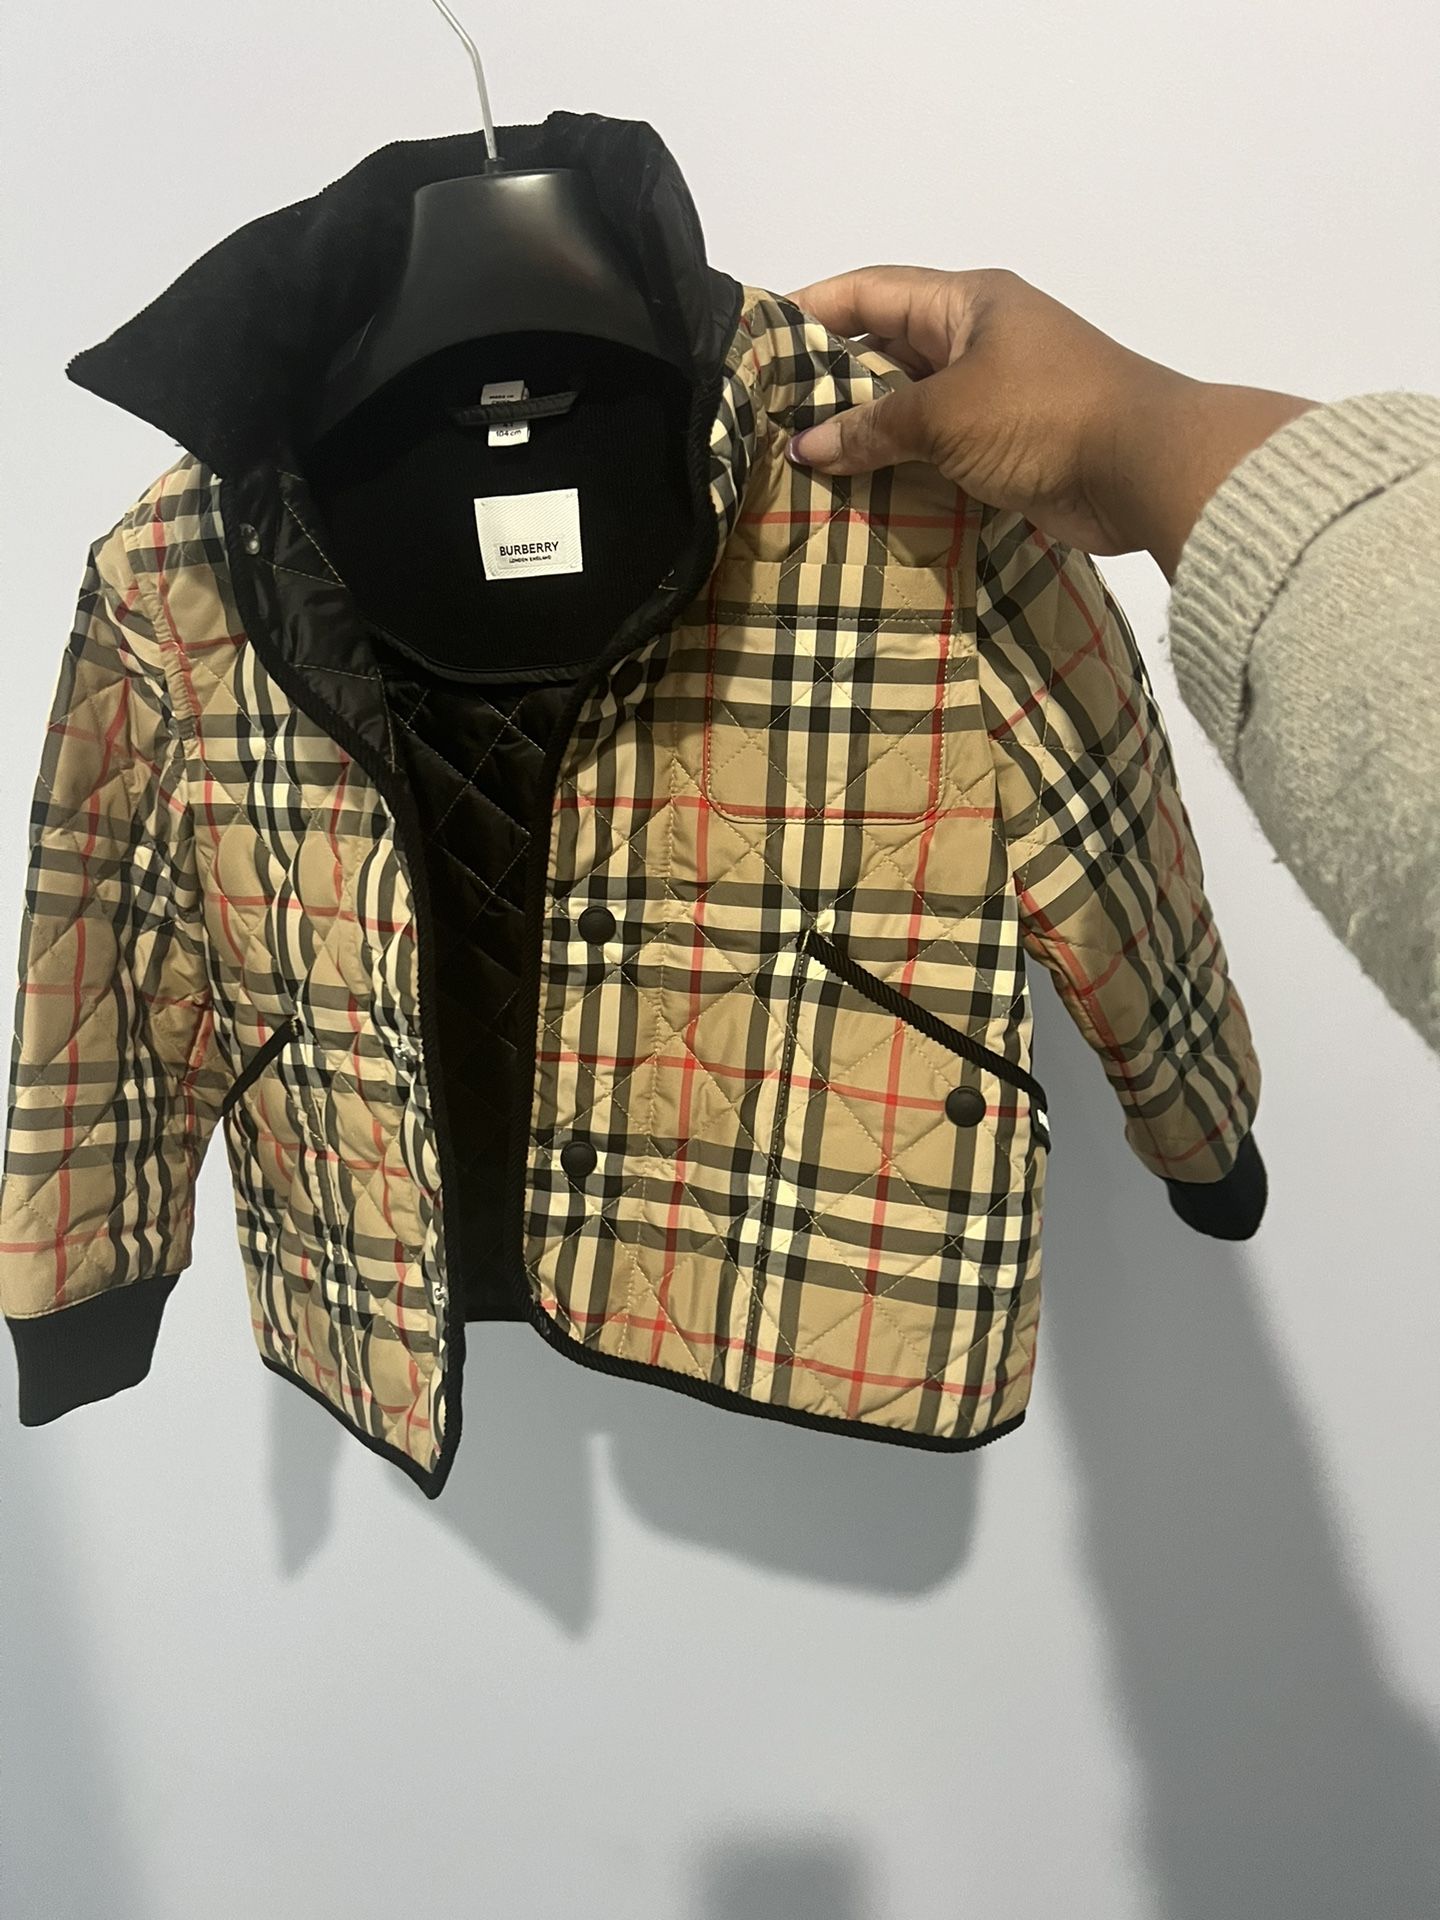 Burberry Jacket For Boys Or Girls 